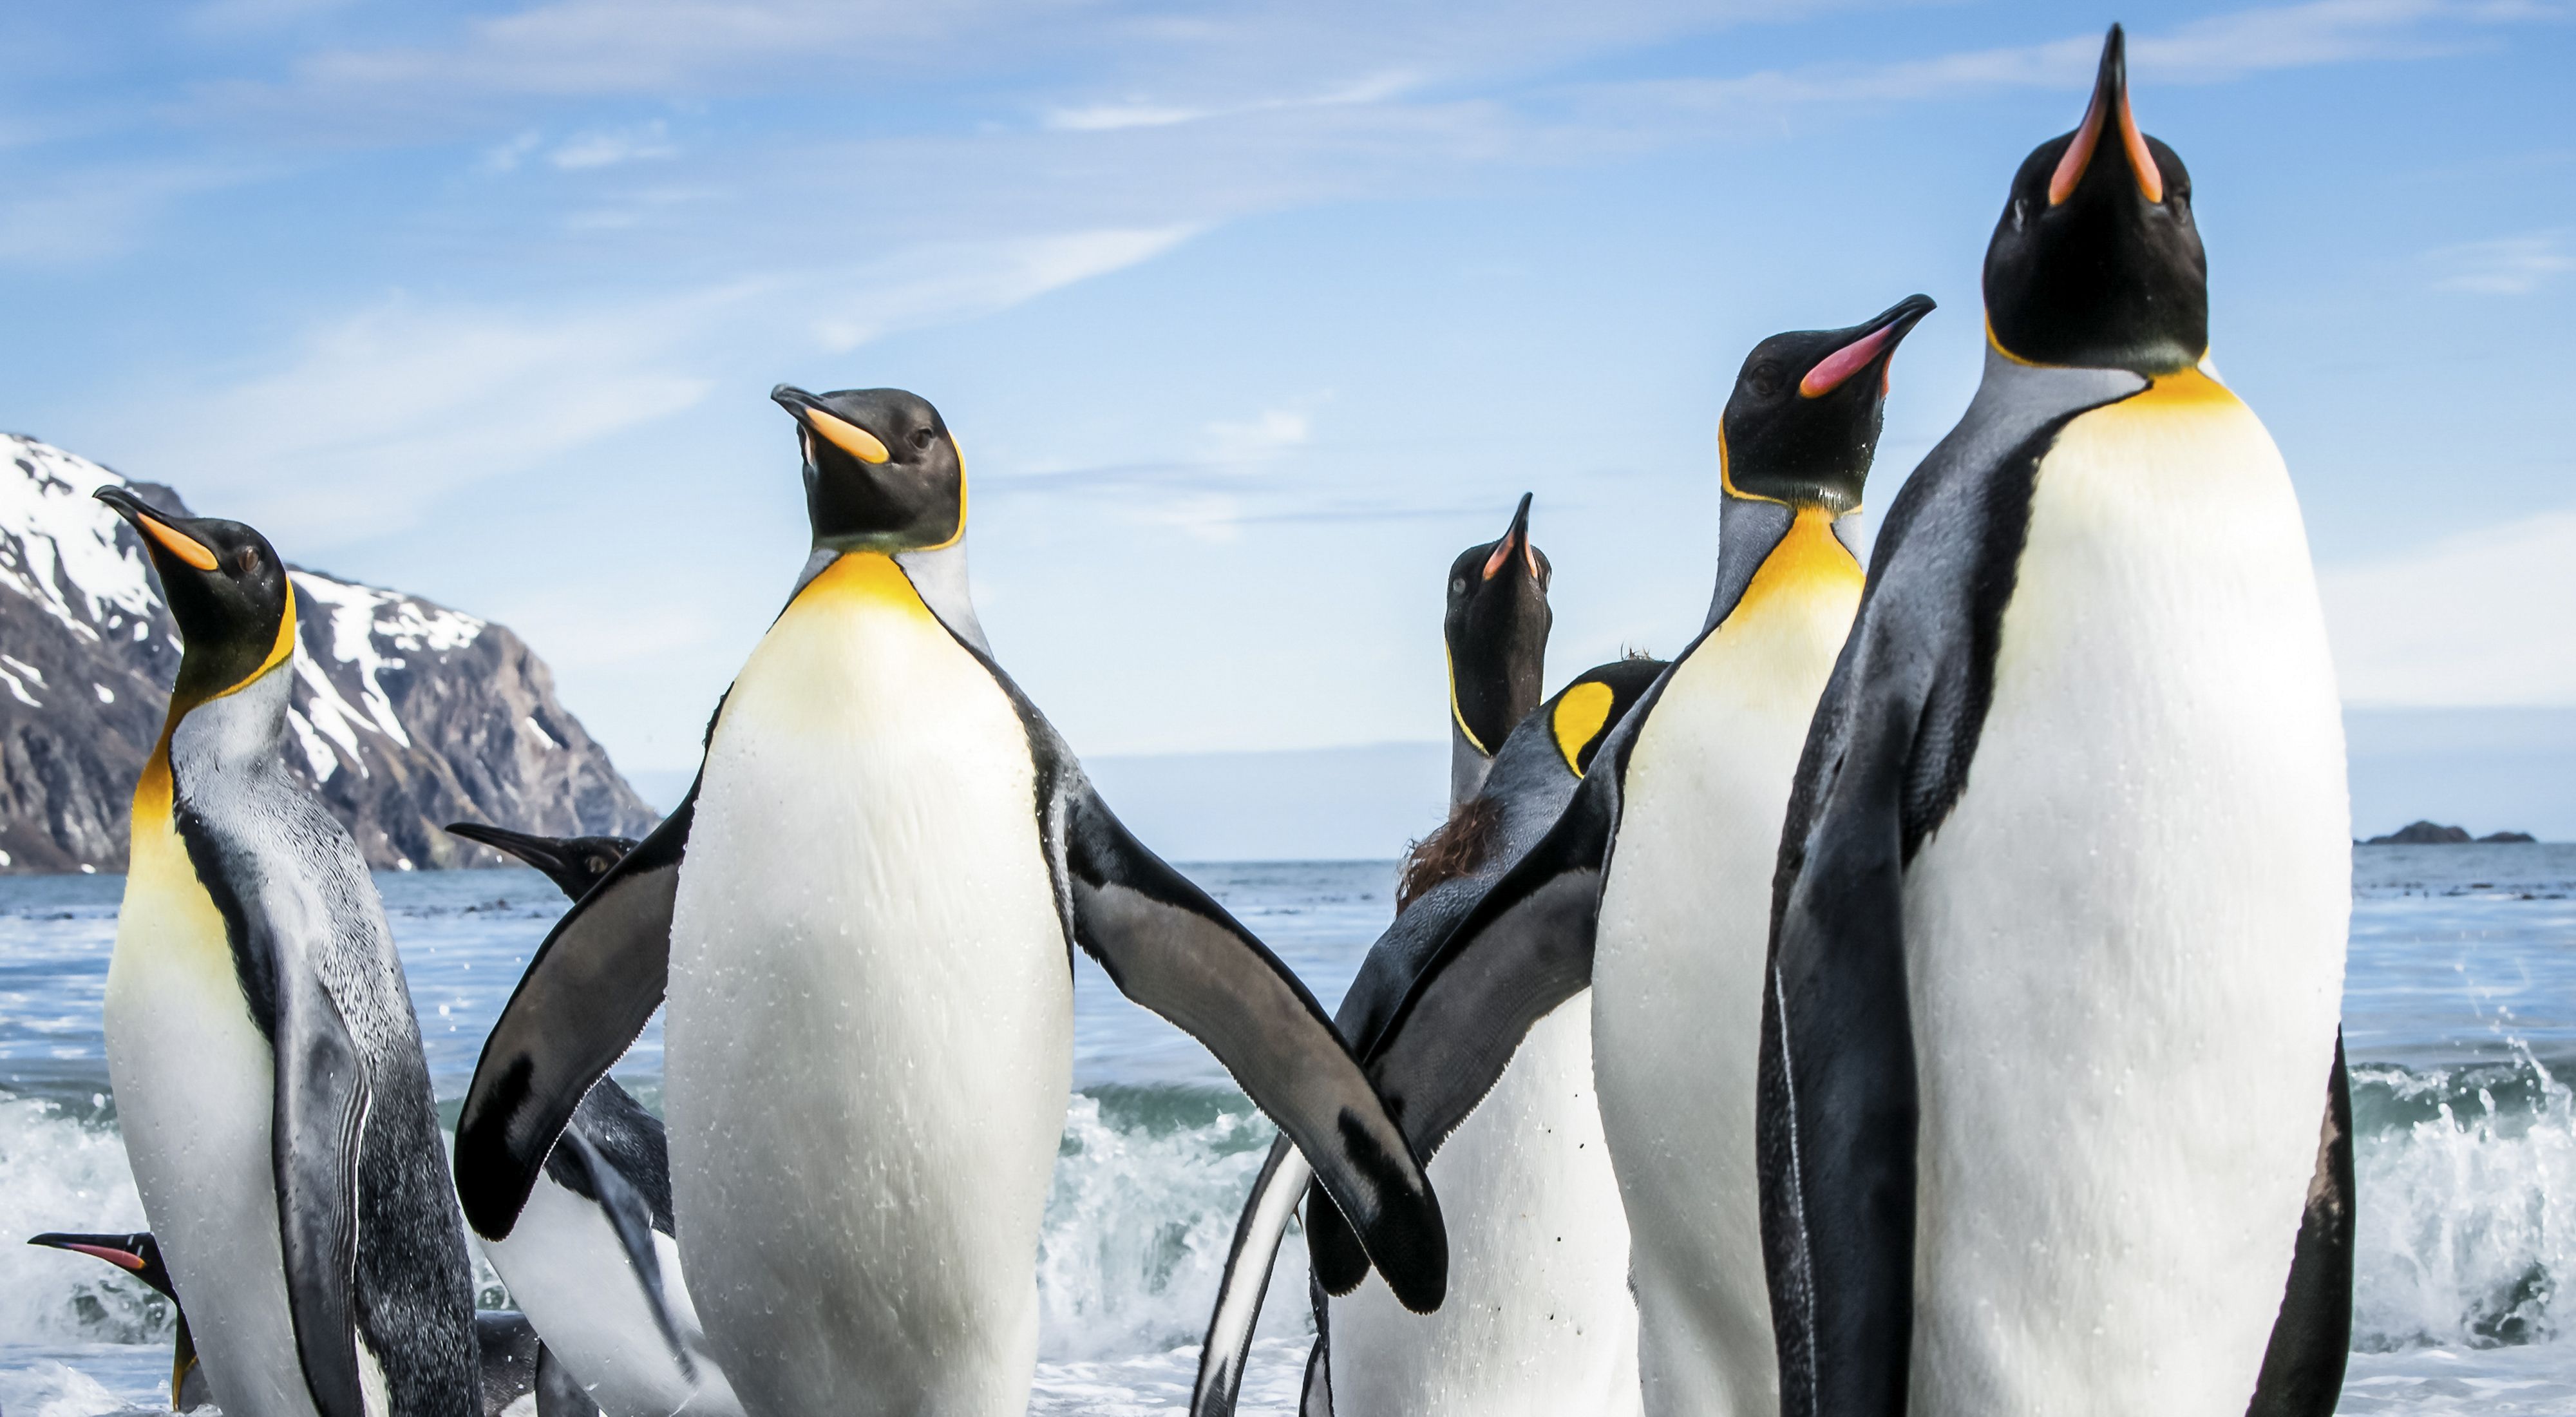 A group of king penguins emerge from the ocean